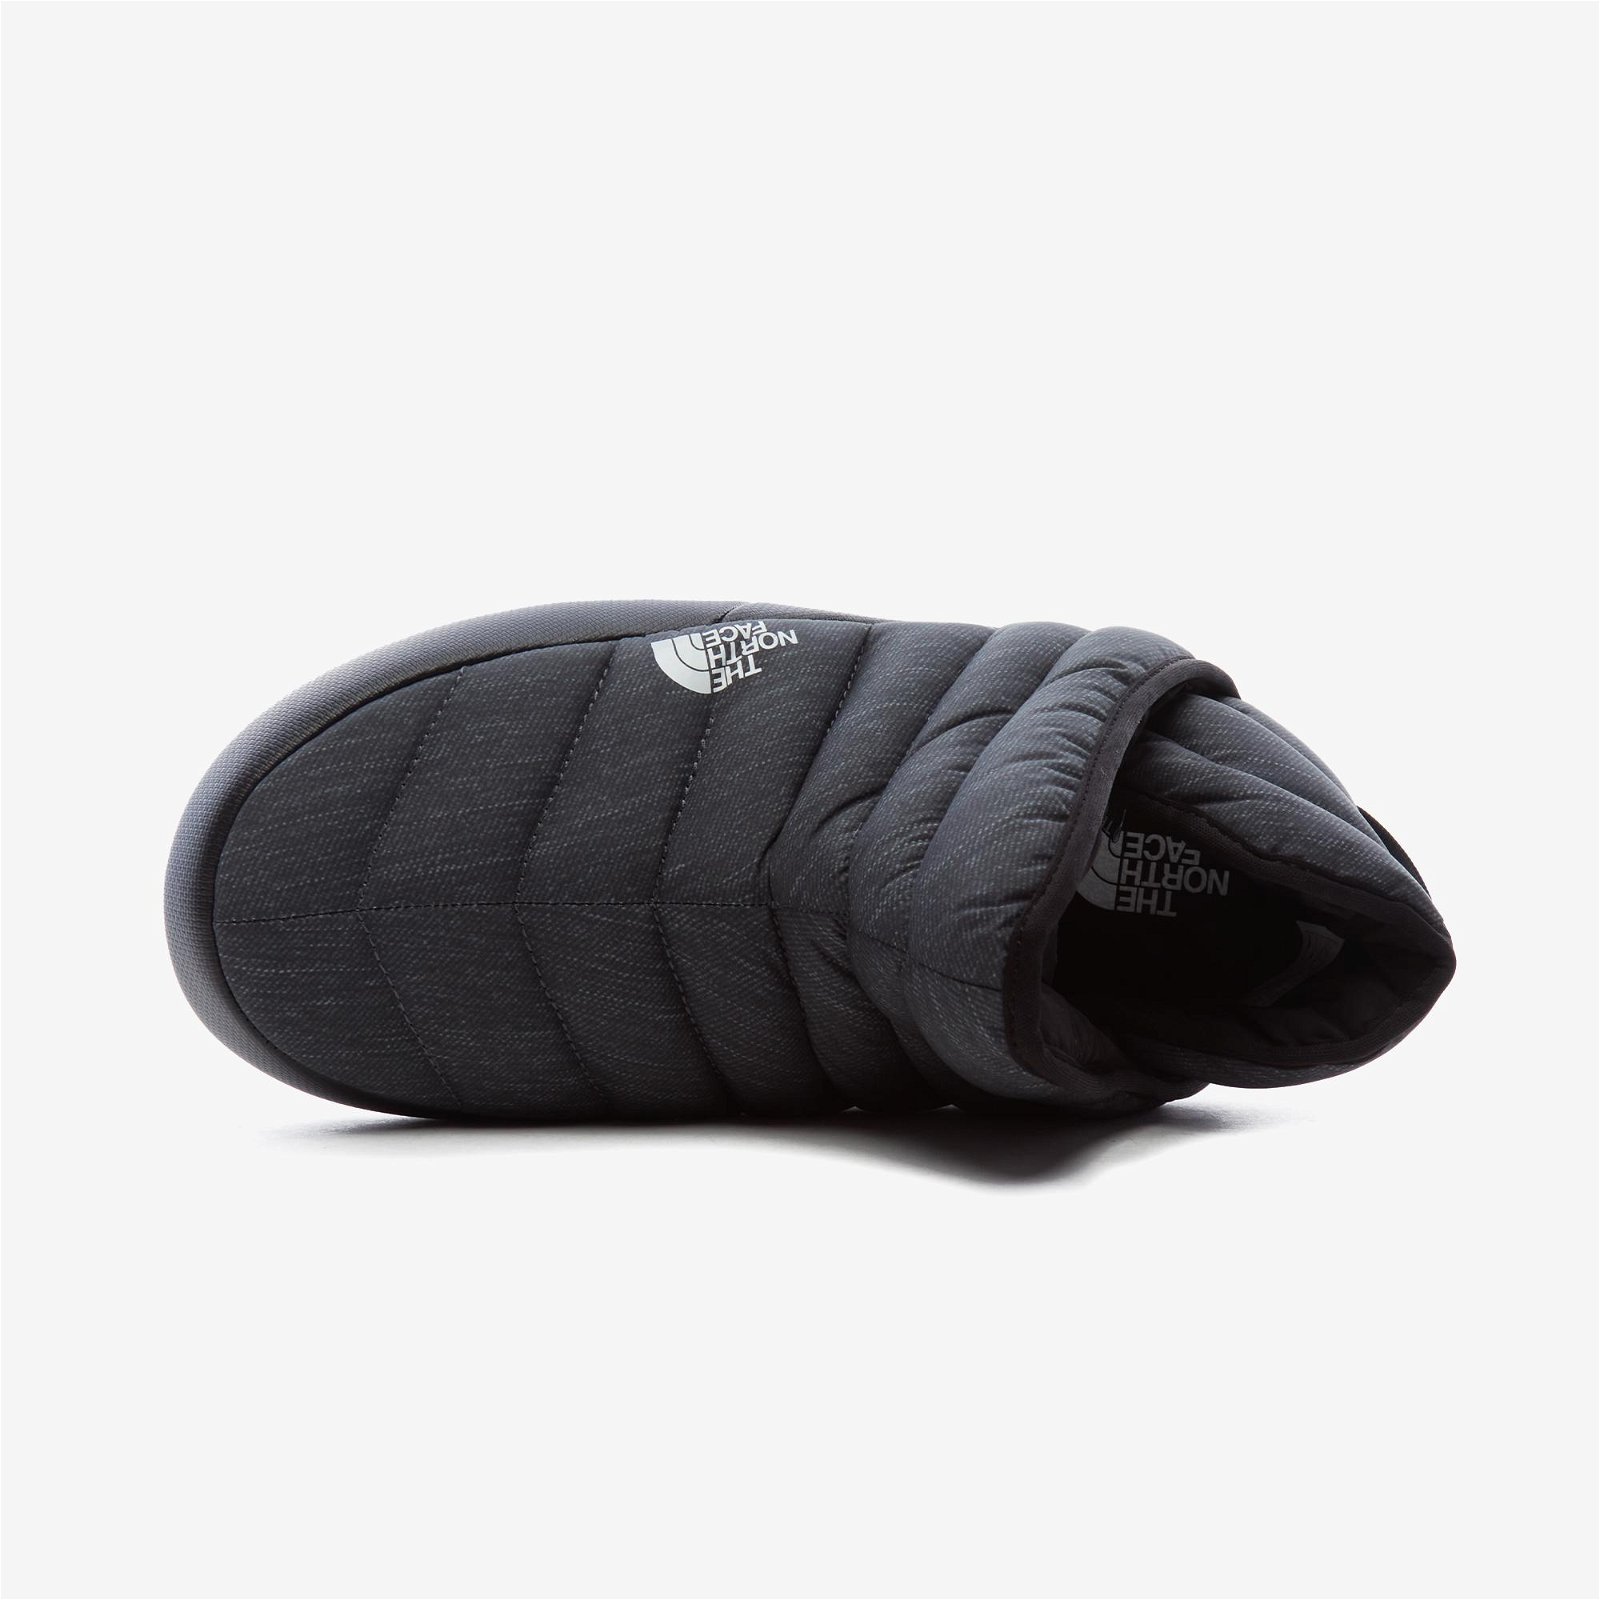 The North Face Thermoball Traction Kadın Gri Bot